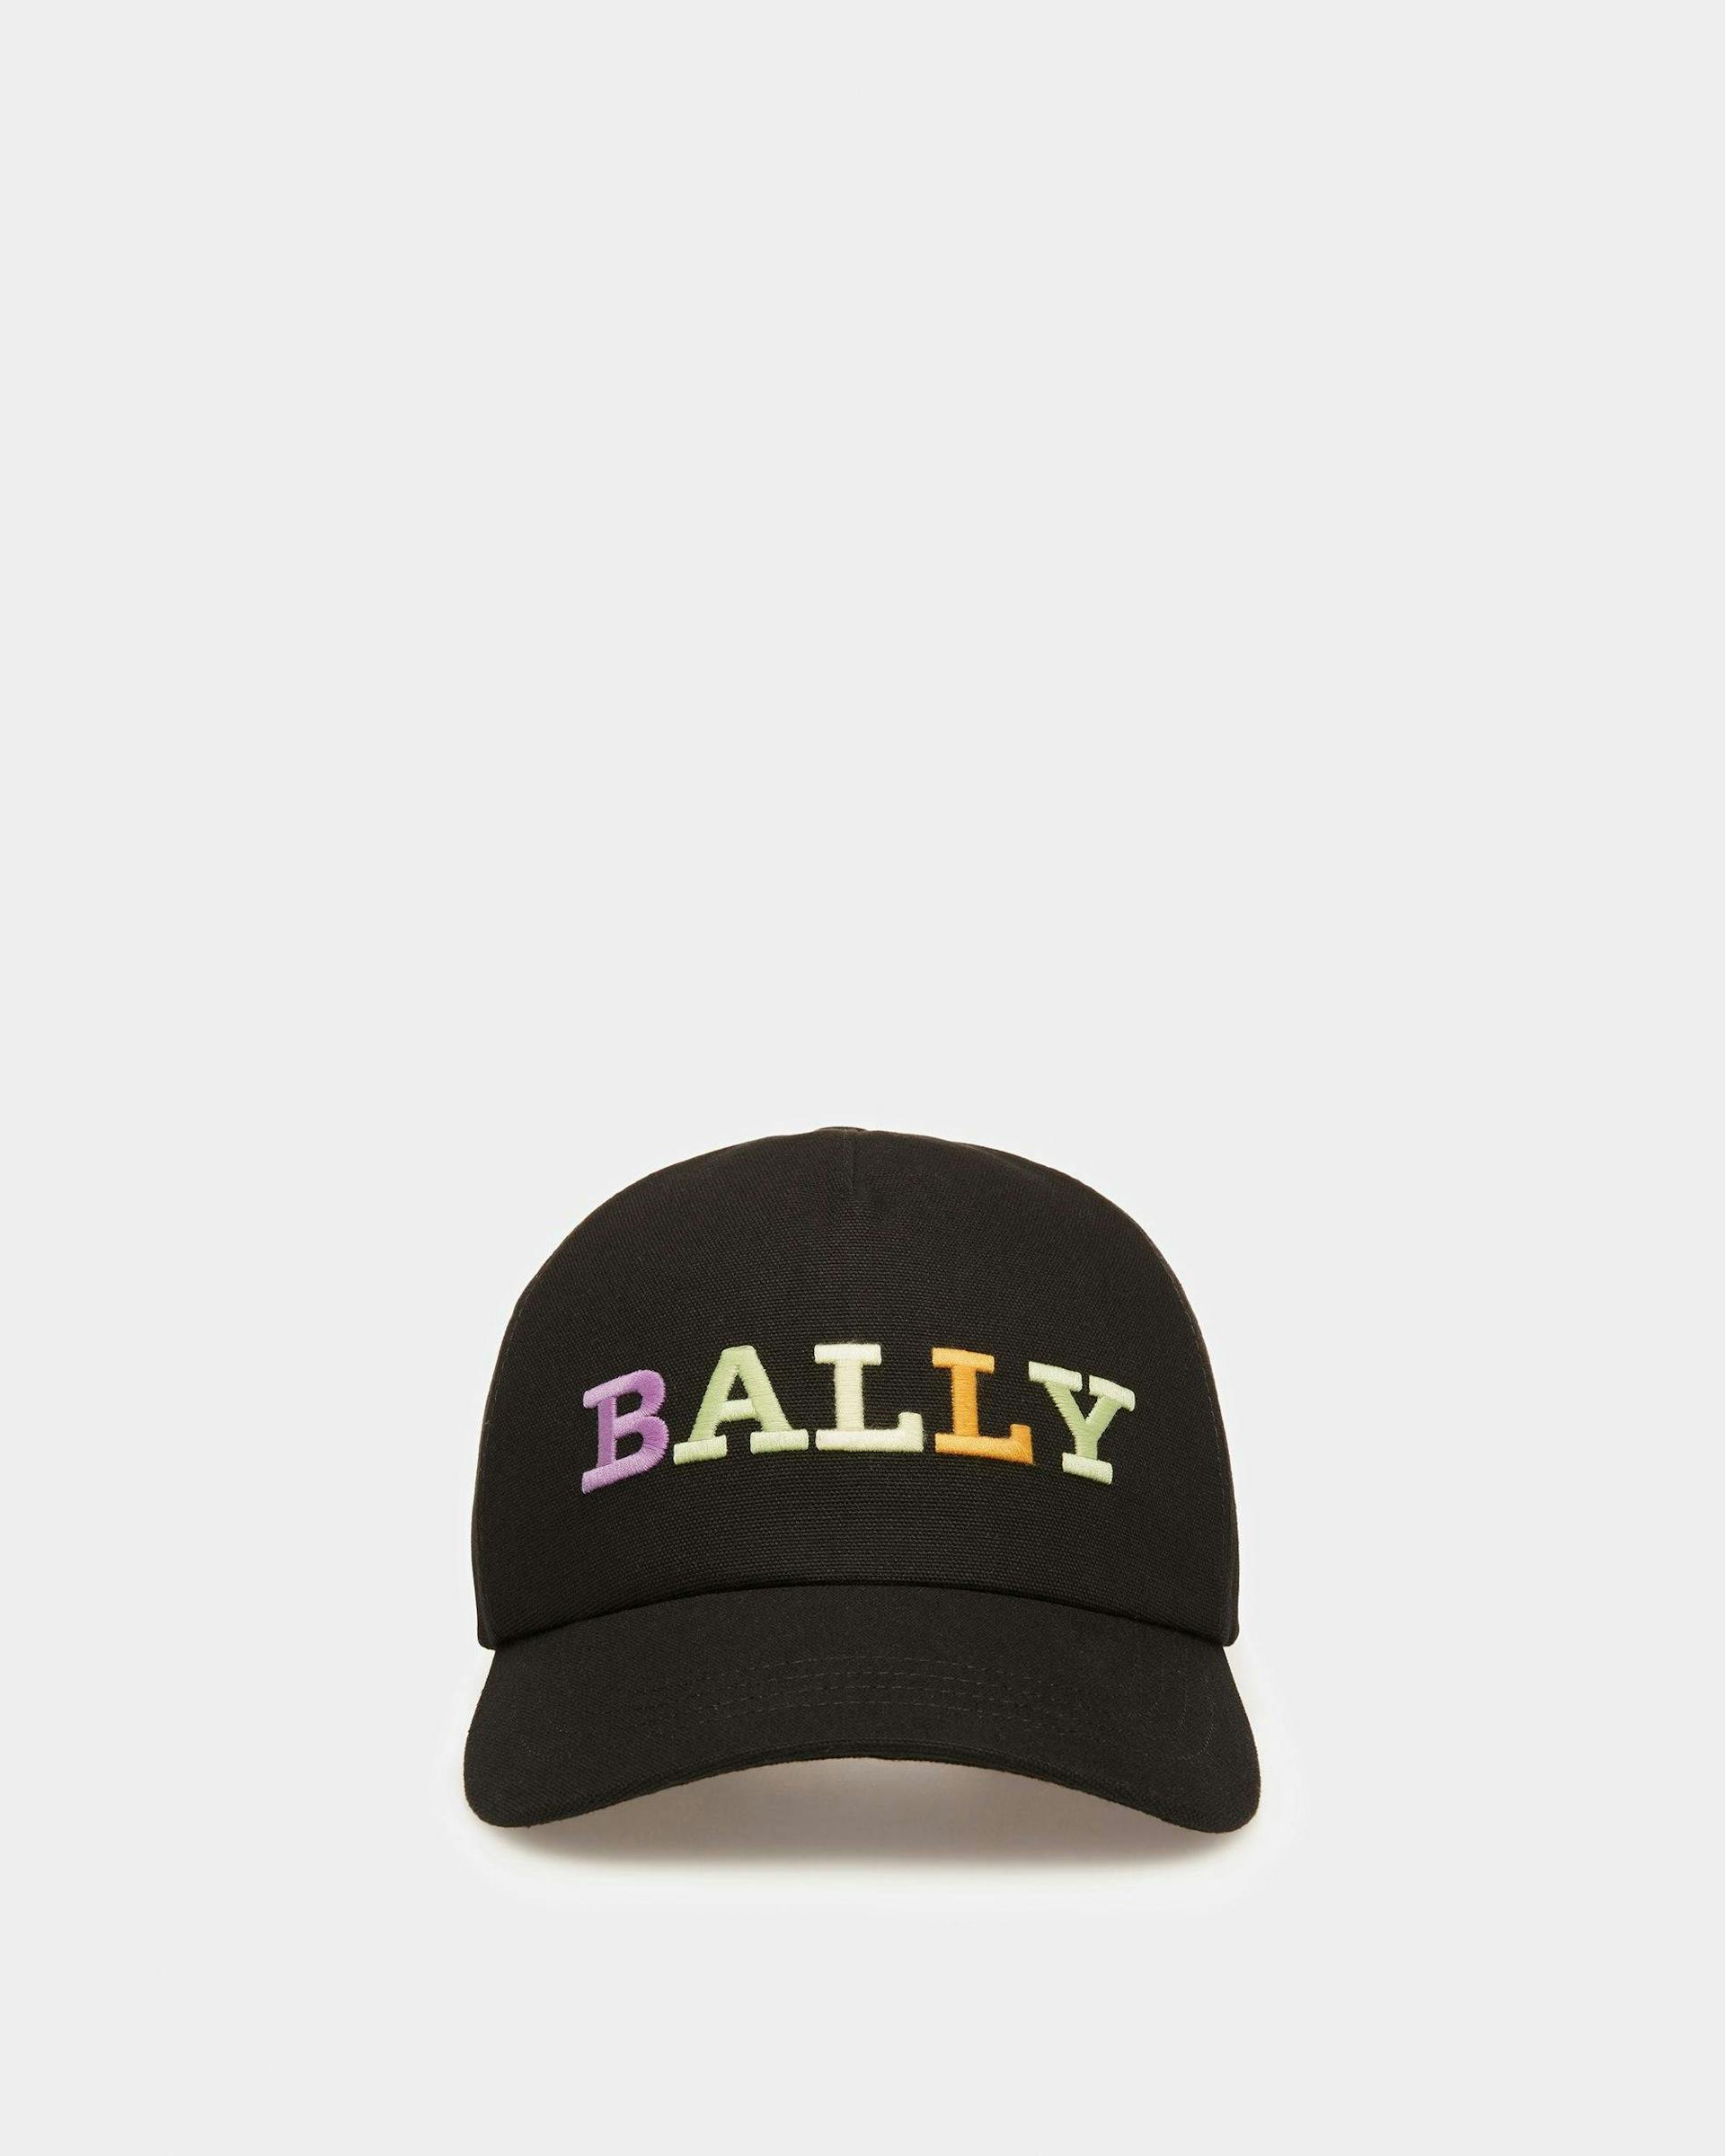 Embroidered - Bally